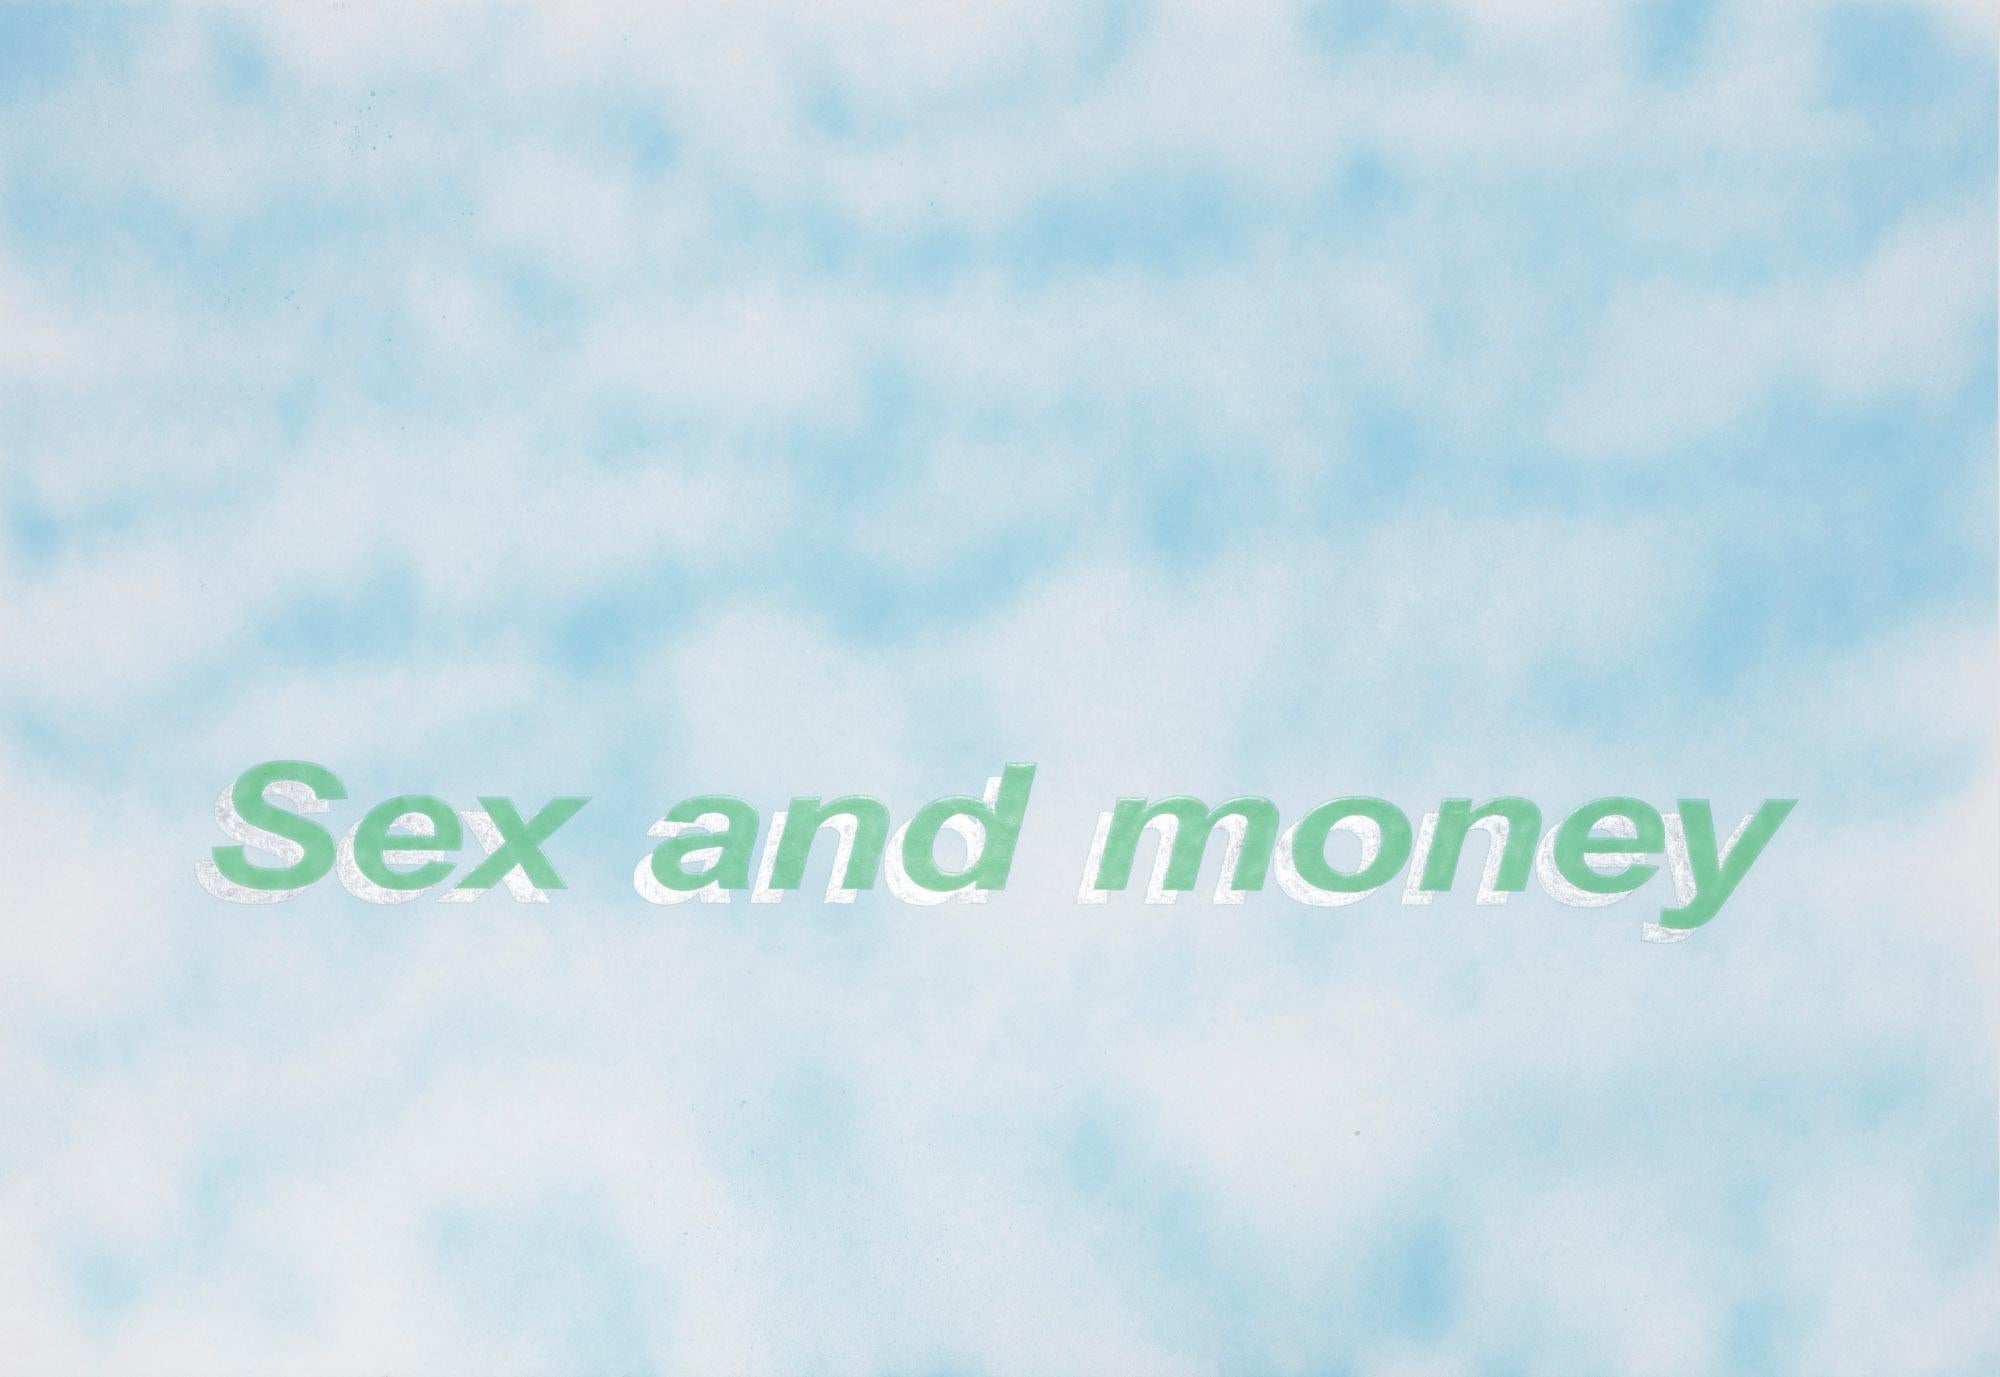 Untitled (Sex and money), 2017 is a unique contemporary textual painting on paper. The artist first creates a unique background atmosphere with matte spray paint and then meticulously hand-paints text in his material of choice, nail enamel.

Artwork